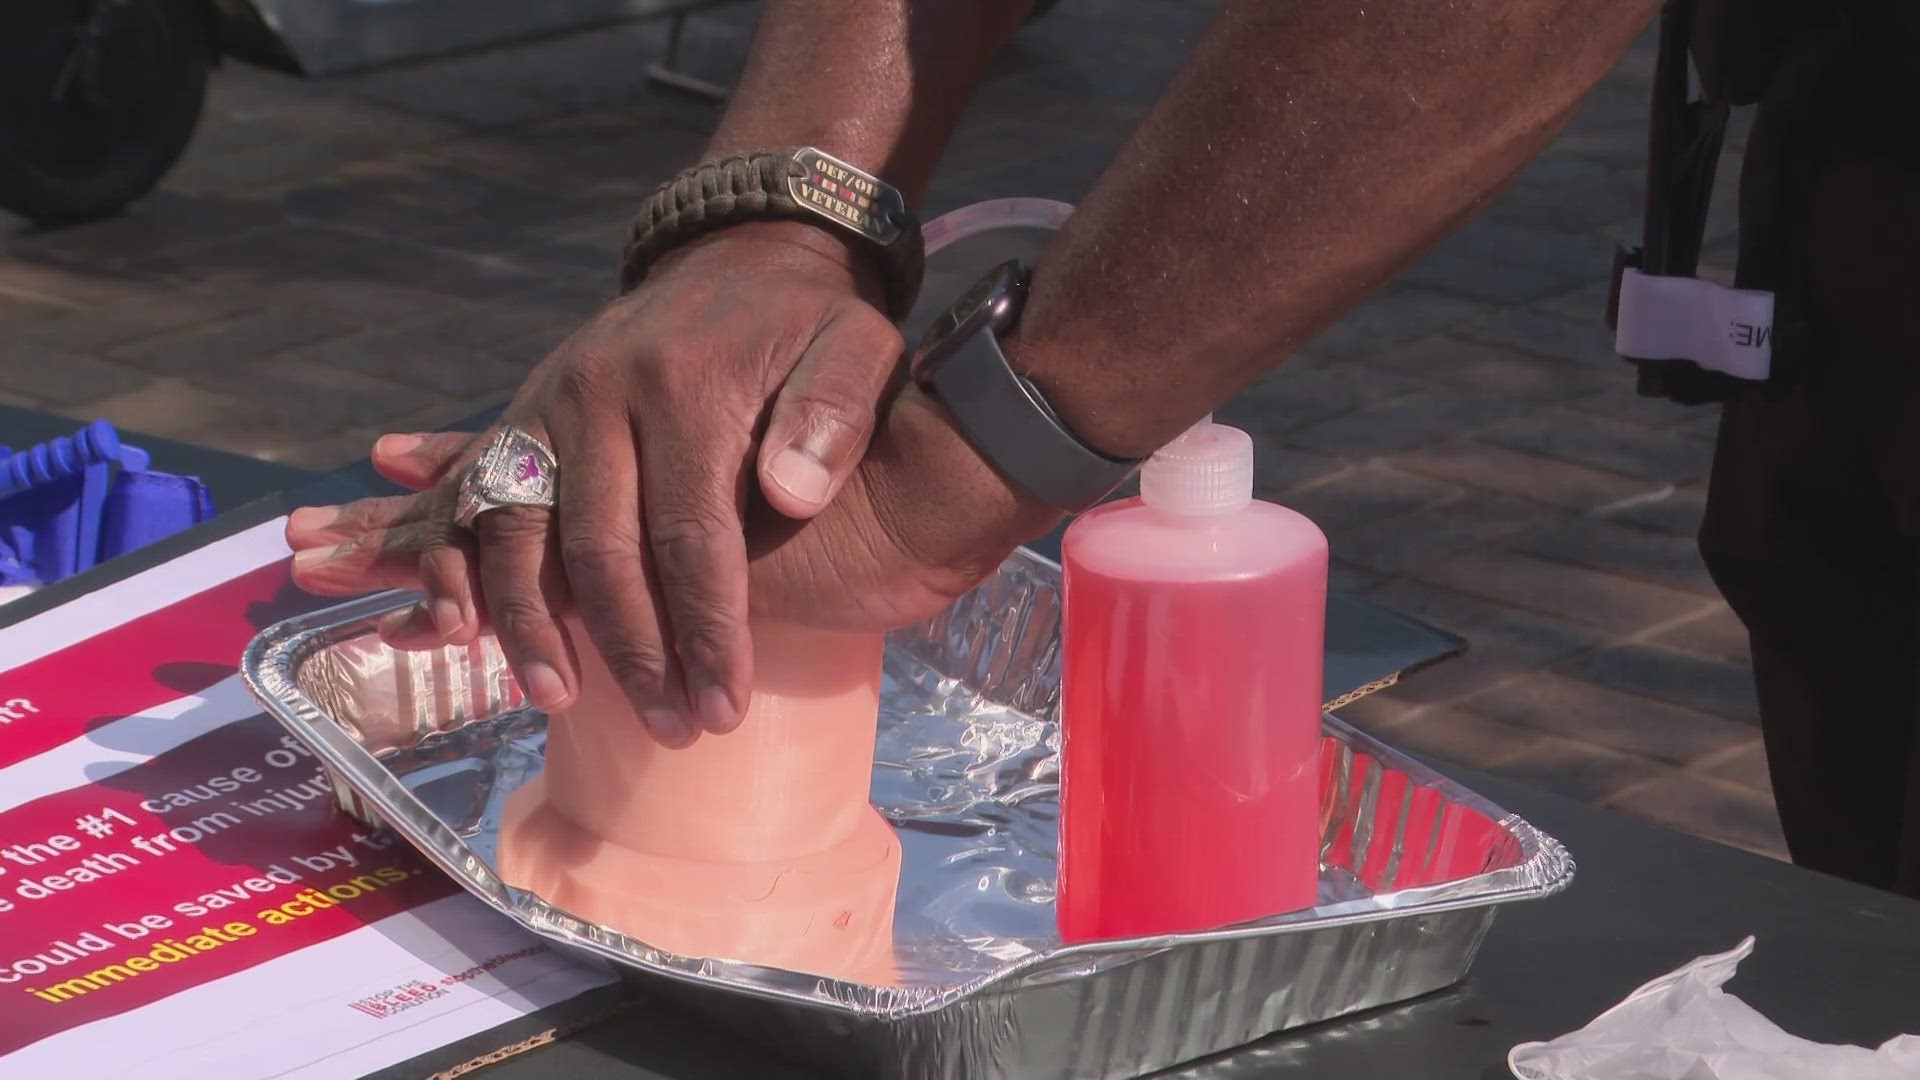 Participants will learn how to properly apply pressure to wounds or use a tourniquet.